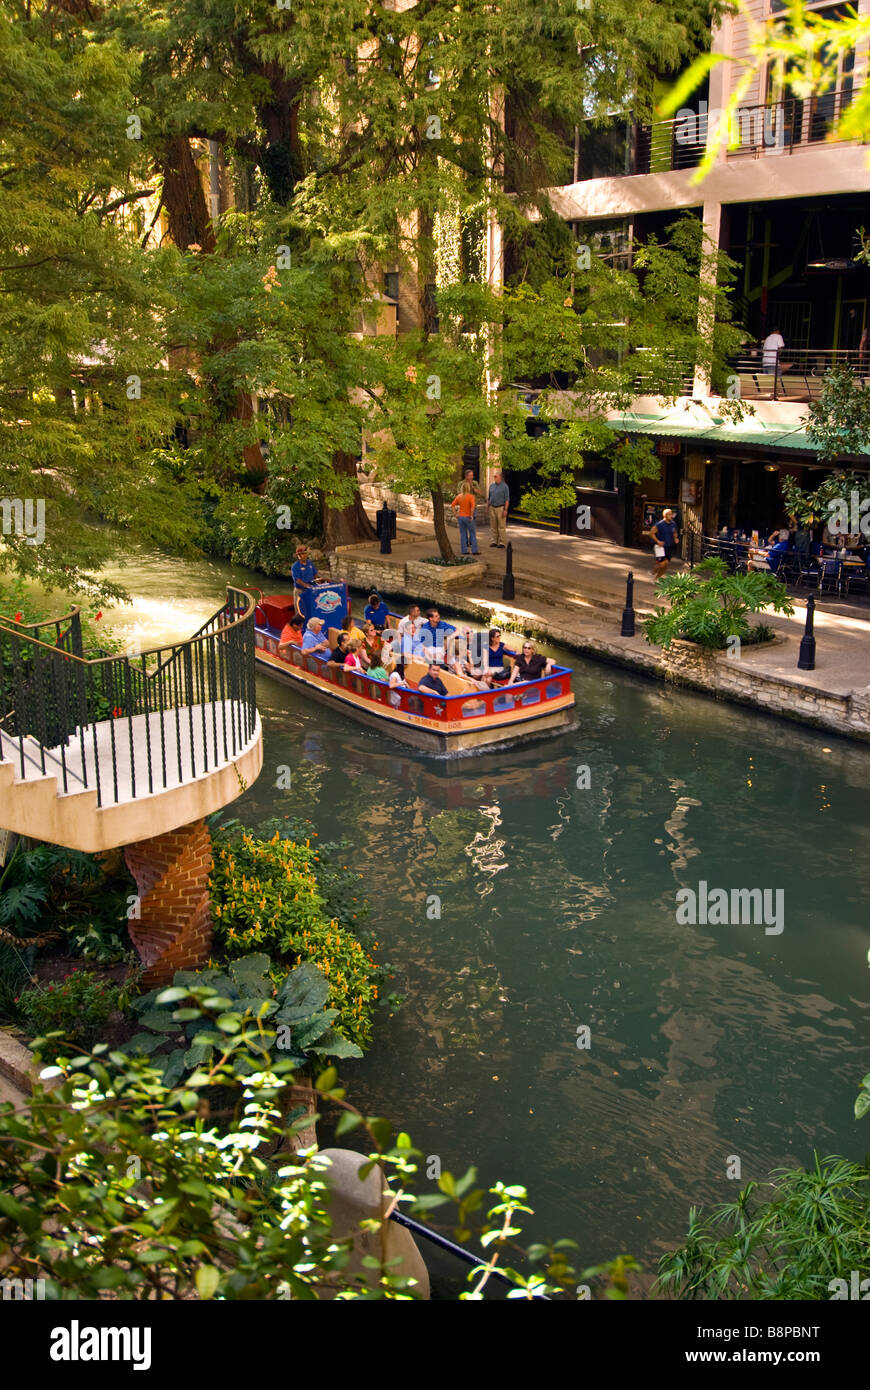 San Antonio River Walk riverwalk tour boat with tourists passes beside outdoor cafes and trees with bright green leaves Stock Photo